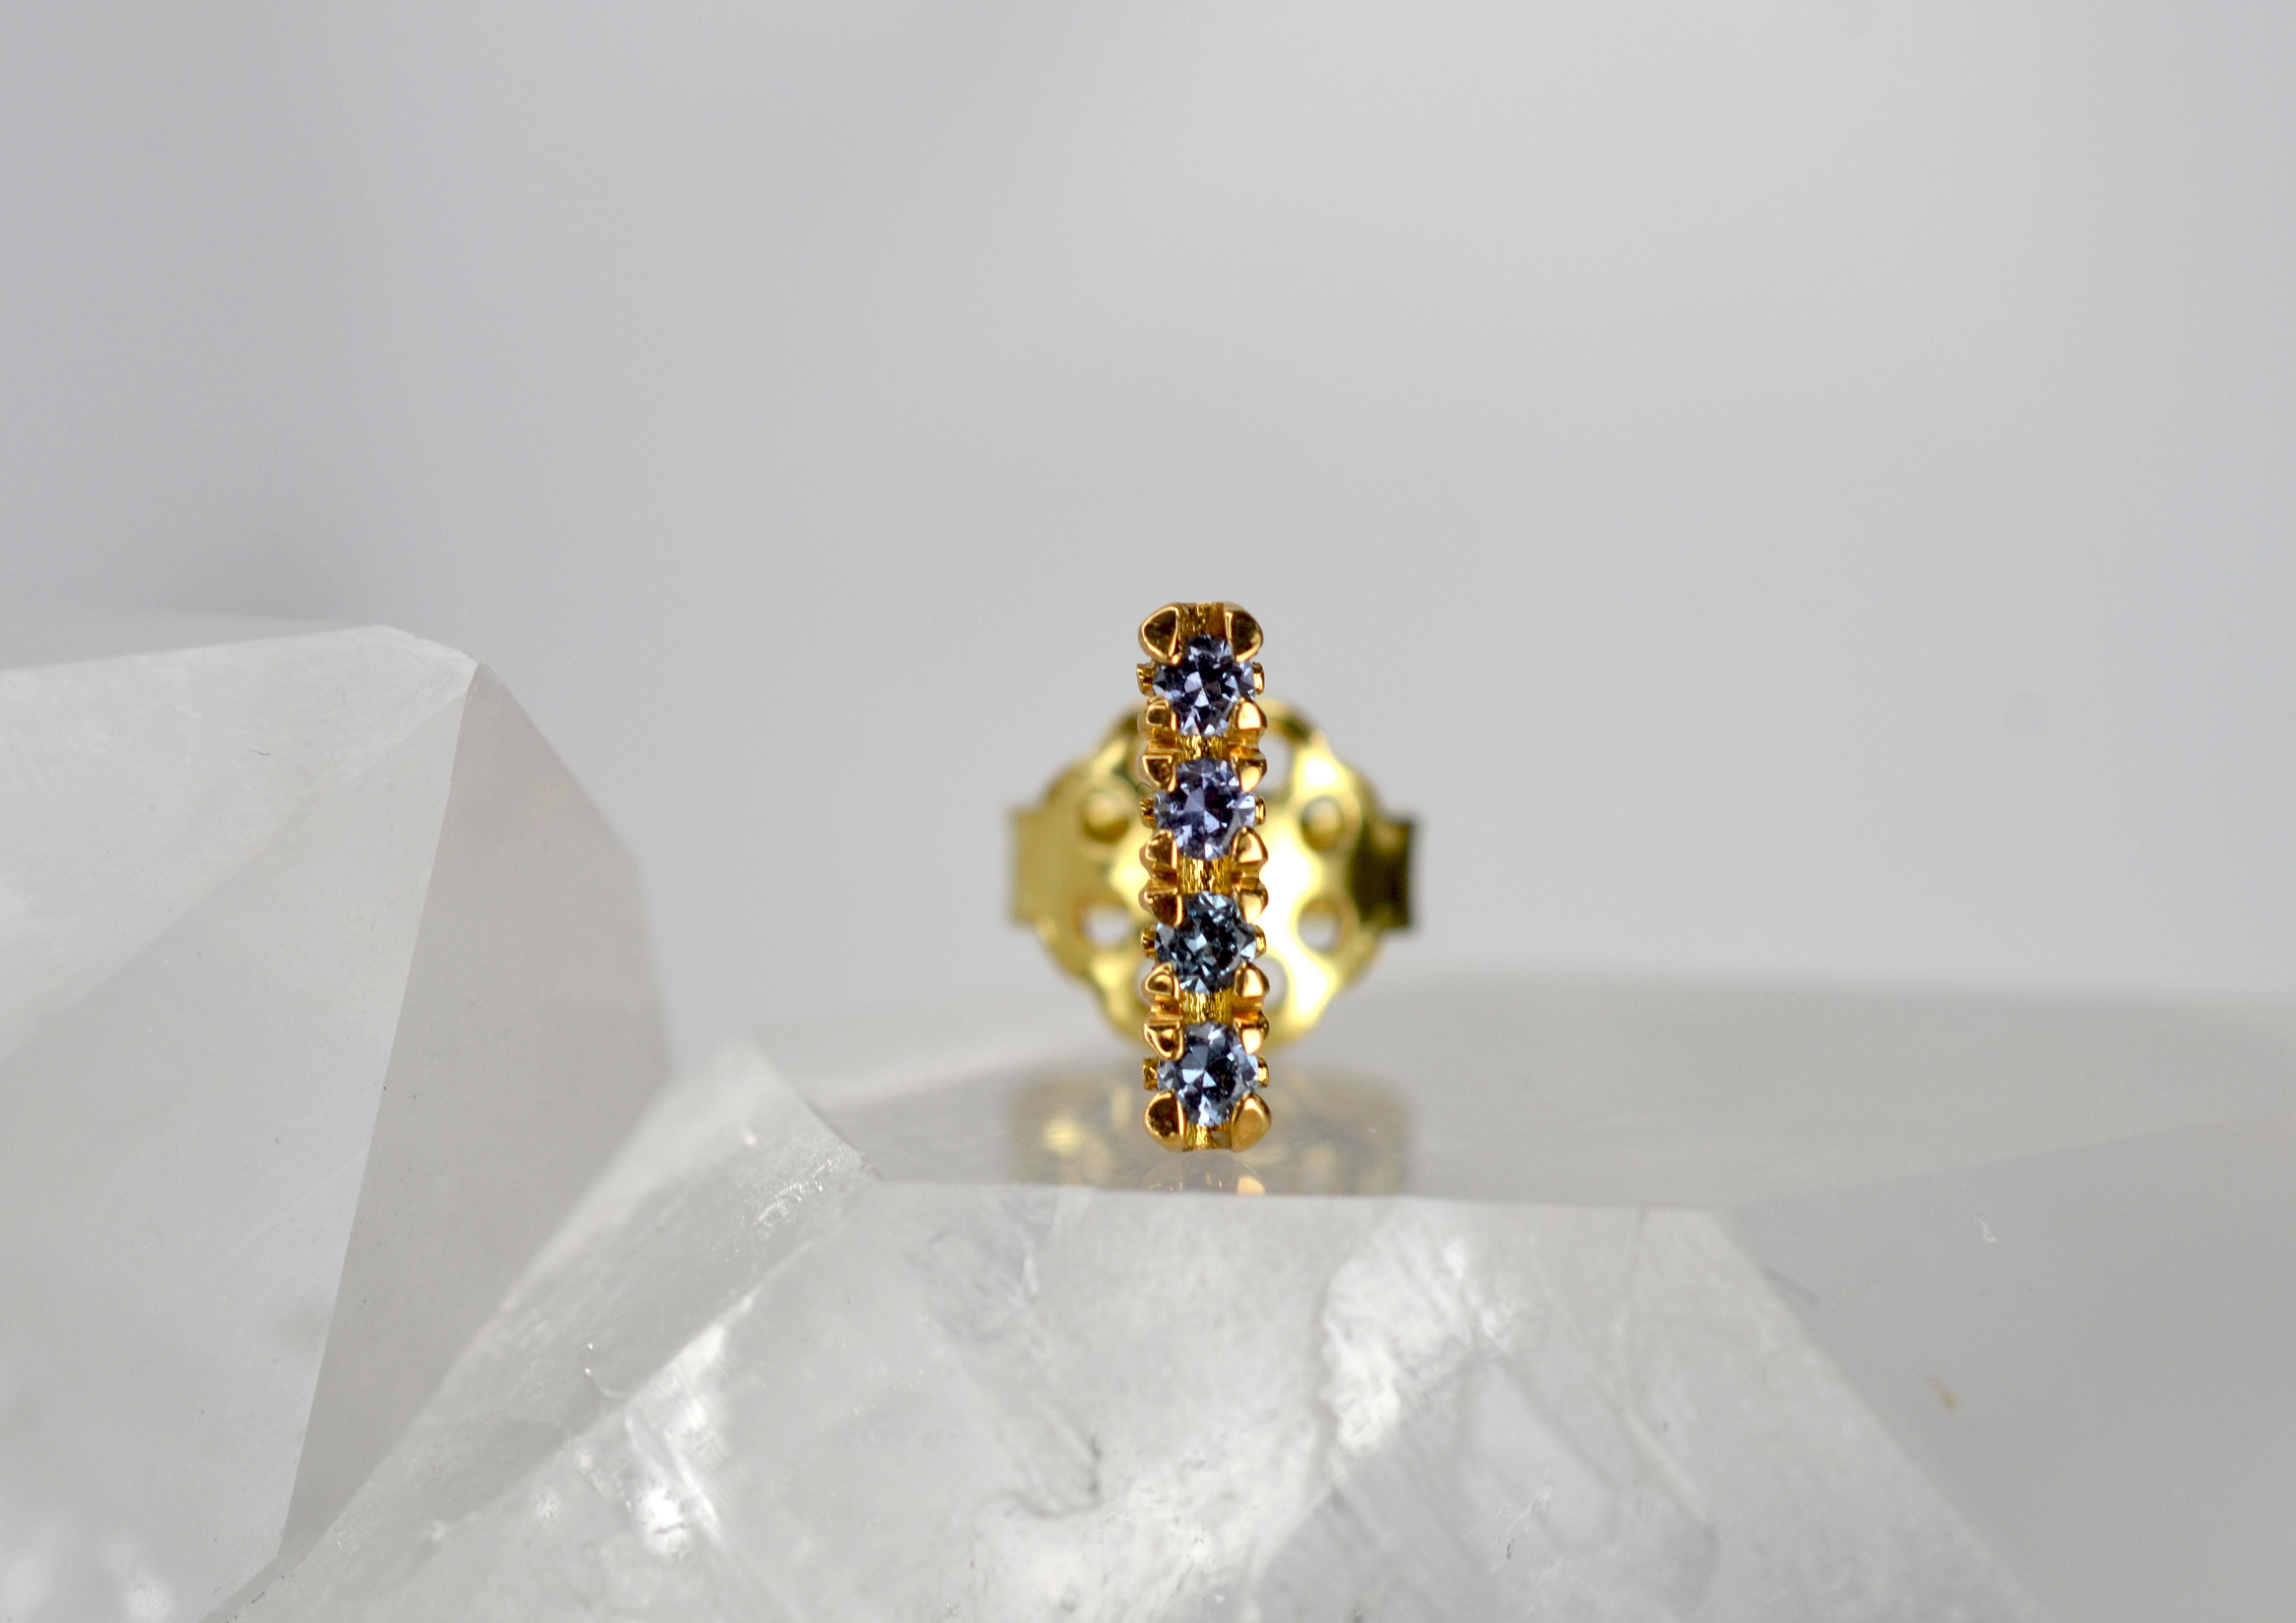 This single earring stud is part of our Blossom Collection of mix and match pieces. This marvellous greenish-blue colour change garnets are set on an 18k gold blossom flower collet to be worn alongside your favourite pair of earrings, our blossom